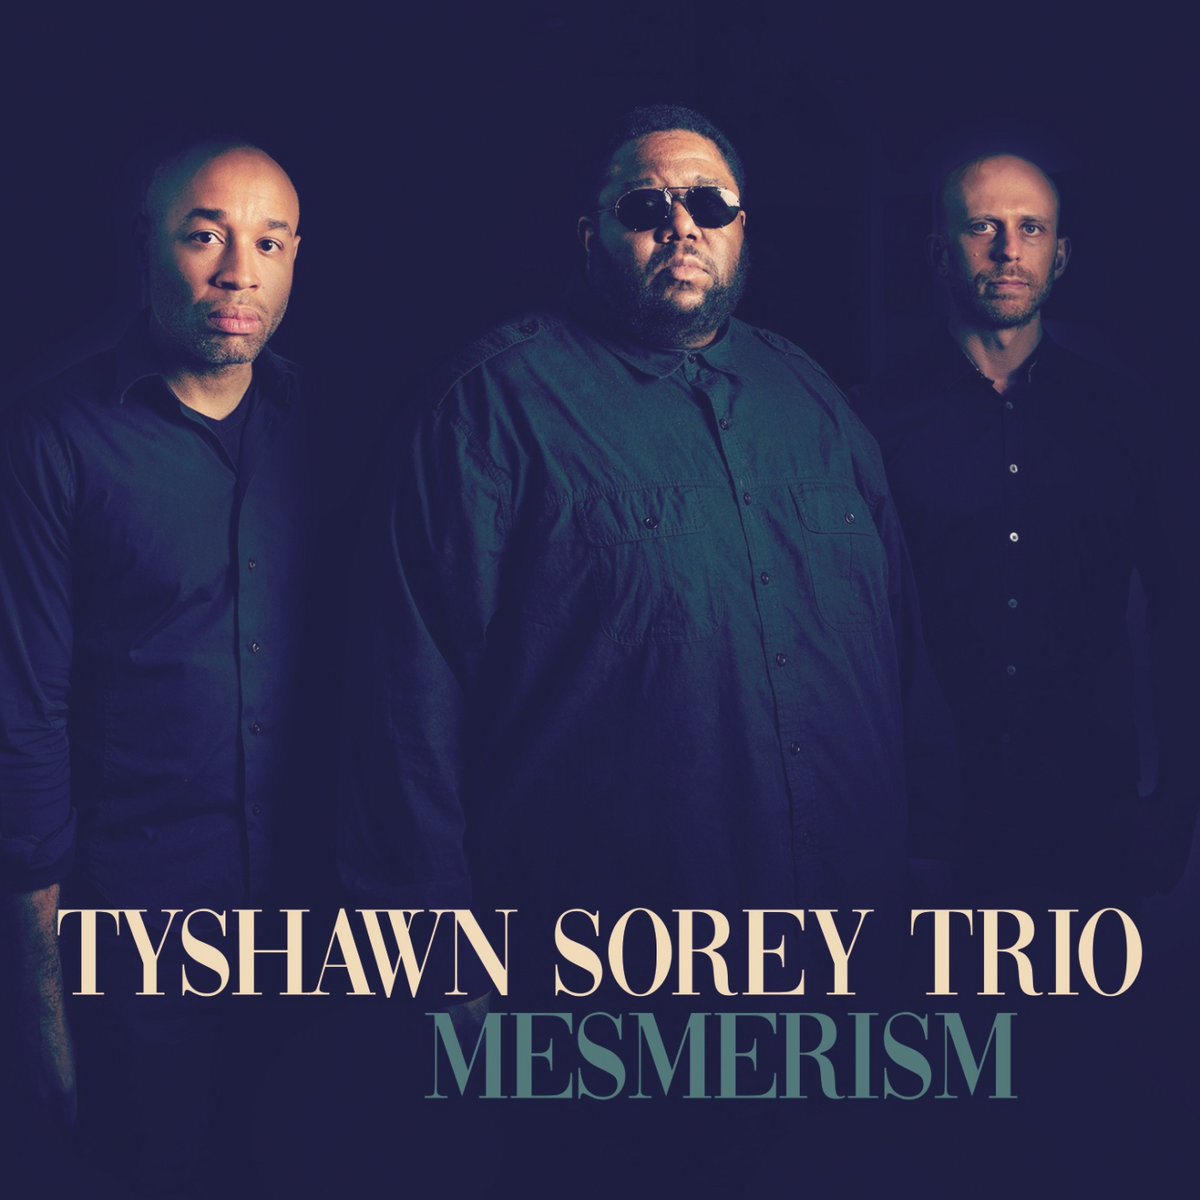 Portrait of three men standing side by side against a muted navy background. Stylized text at the bottom of the fram reads, "Tyshawn Sorey Trio, Mesmerism"